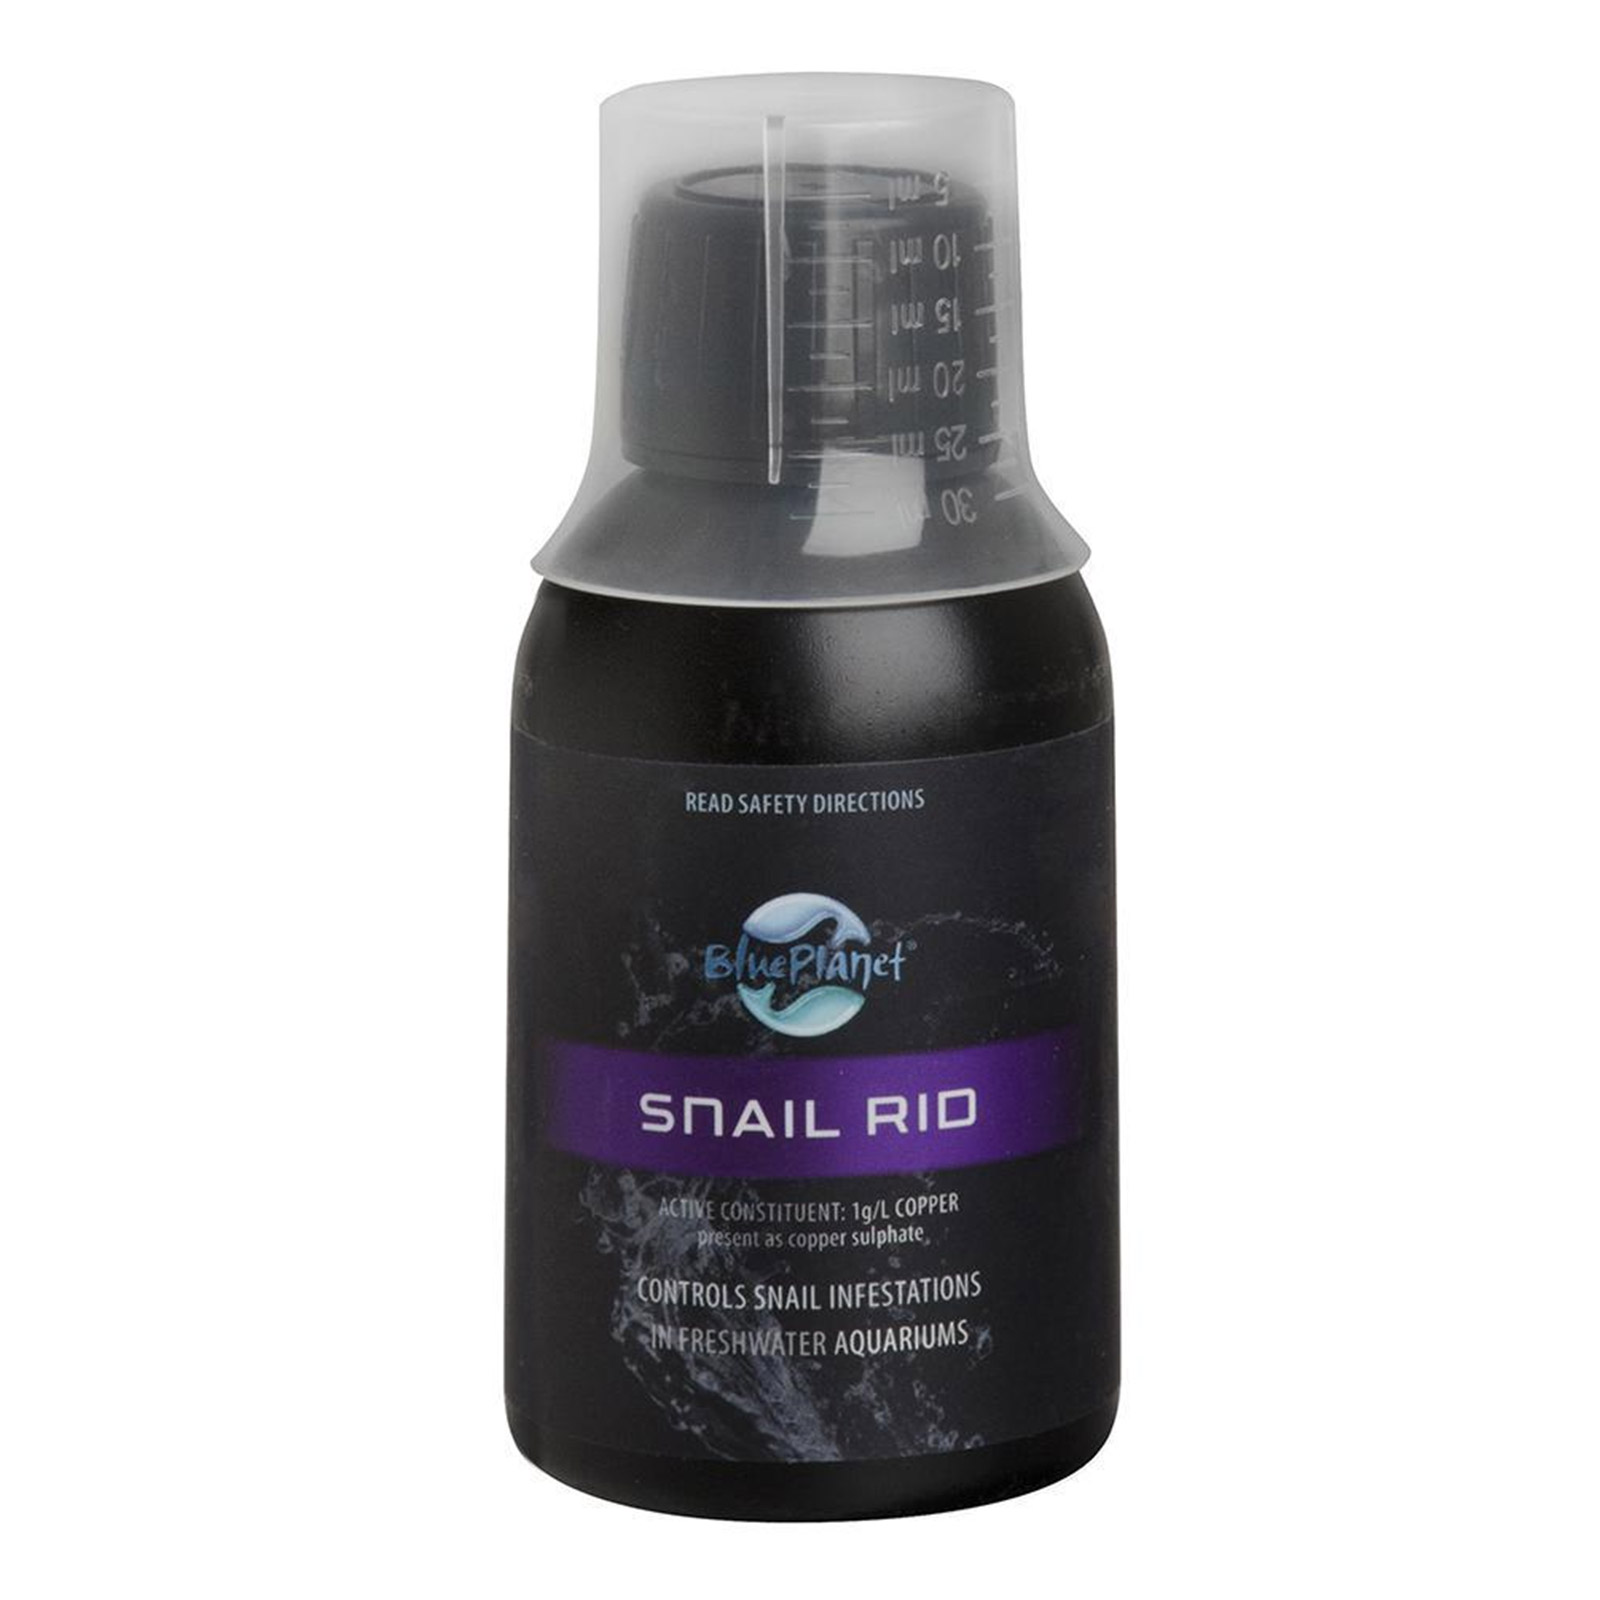 Blue Planet Snail Rid for Fish Supplies